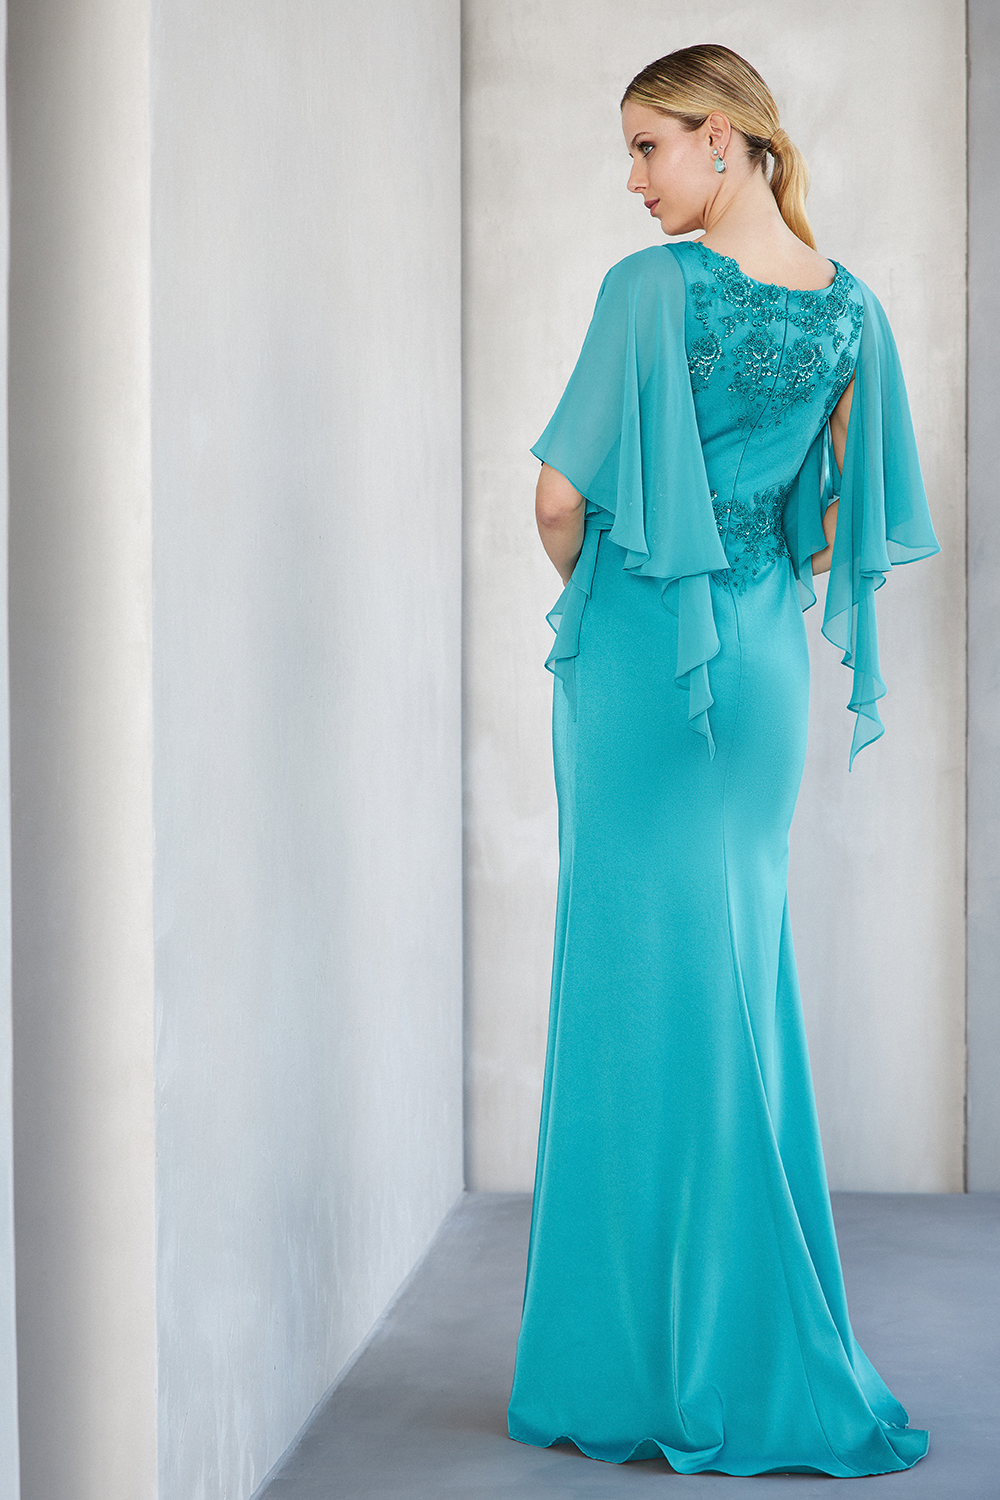 Long evening satin dress with beaded top and sleeves with tulle